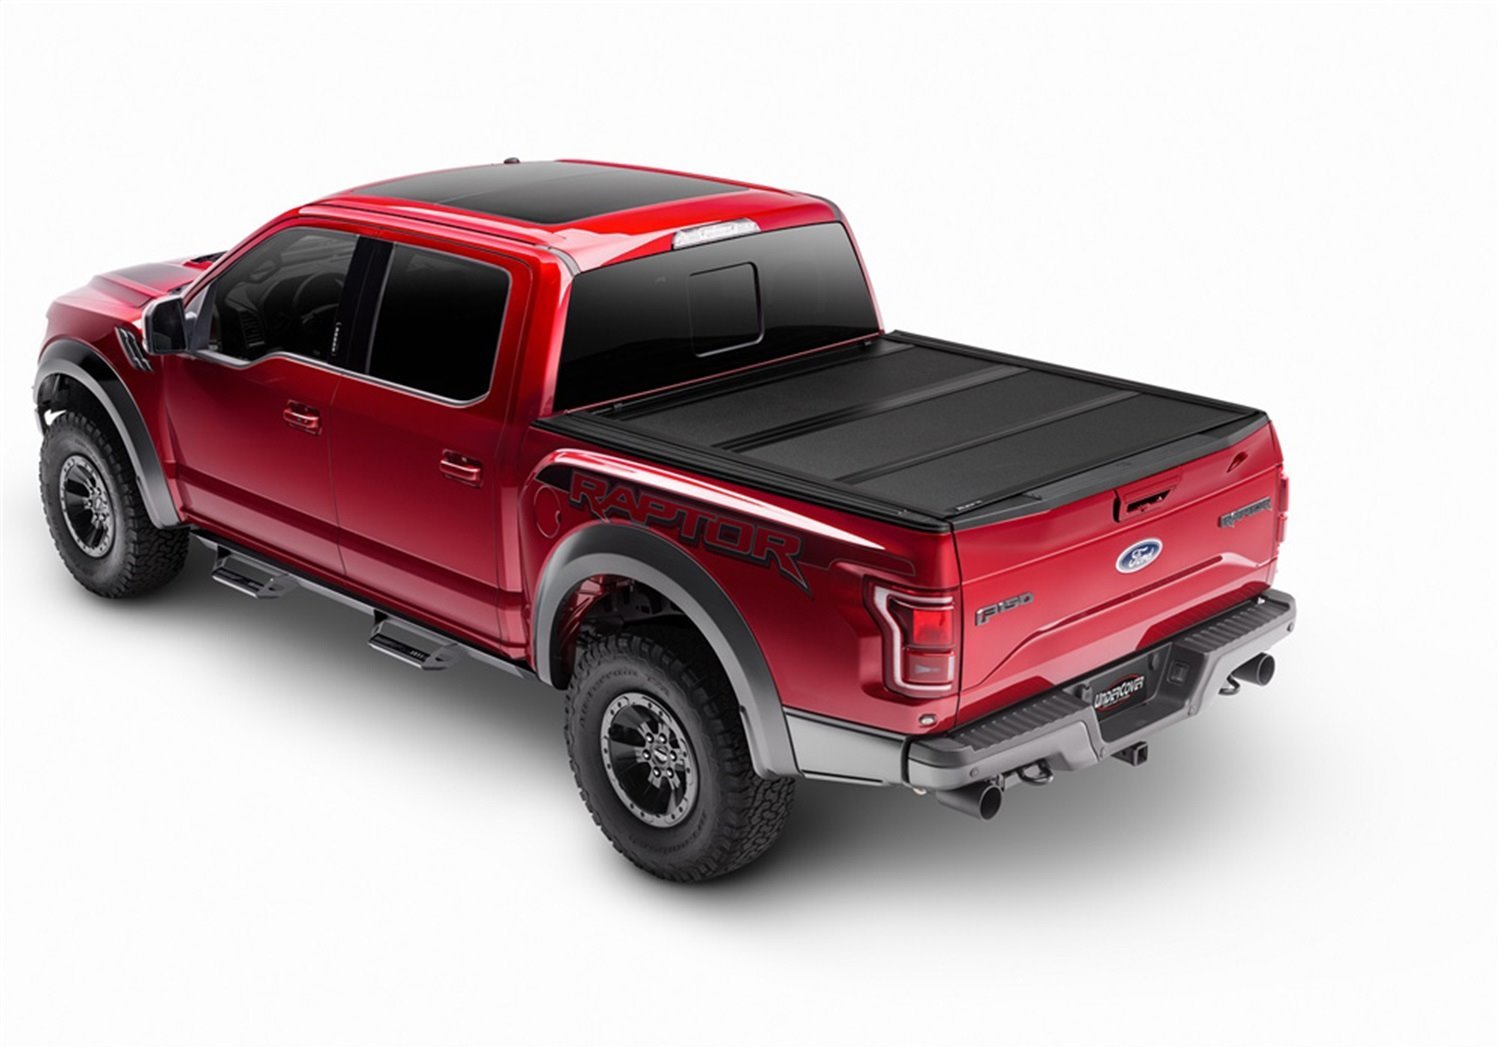 AX52021 Armor Flex Hard Folding Cover, Fits Select Nissan Frontier 6'1" Bed w/ or w/o Utili-Track System, Black Textured